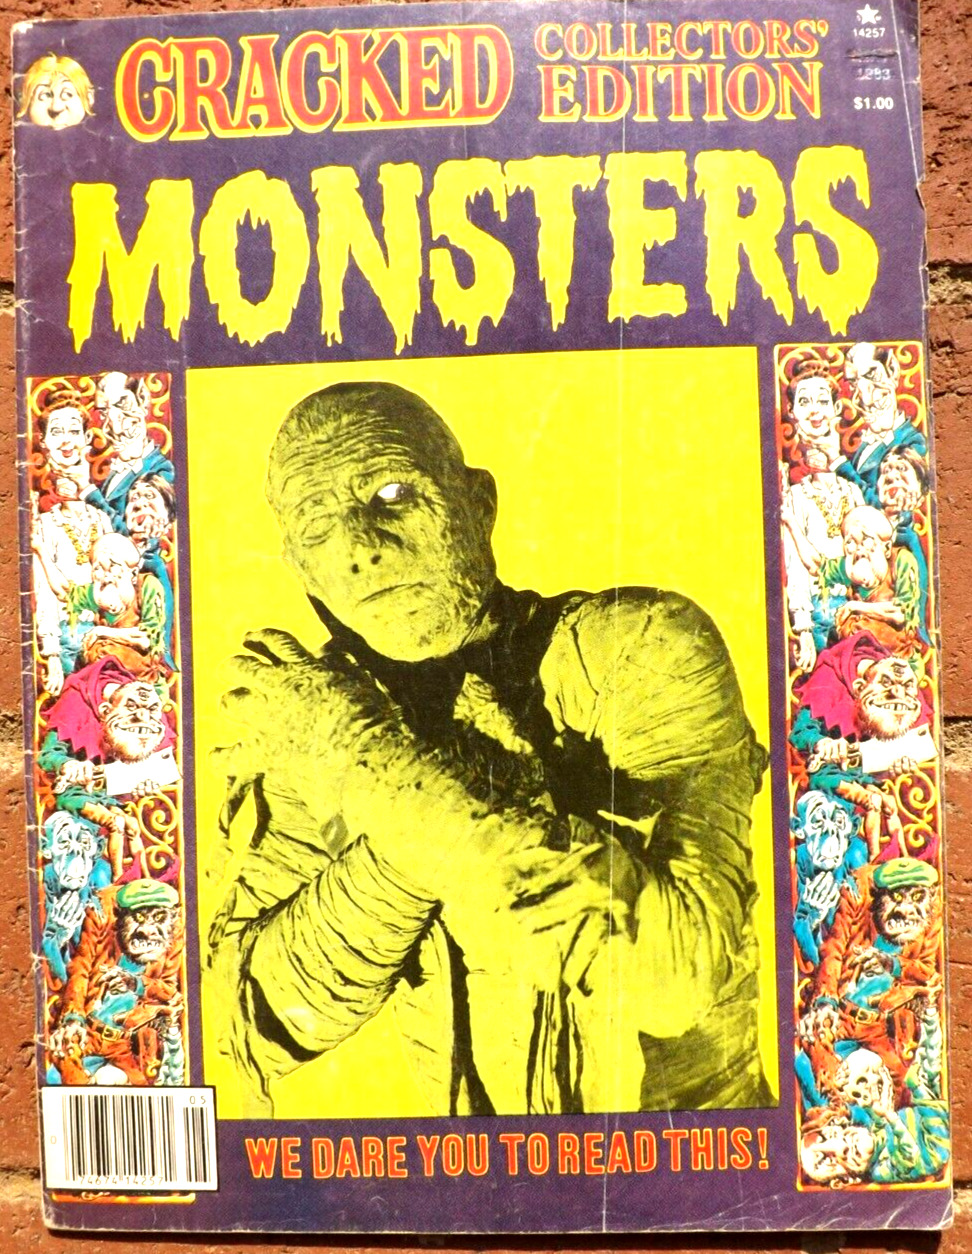 CRACKED MONSTERS COLLECTORS EDITION MAGAZINE 1983 TRADING CARDS MUMMY